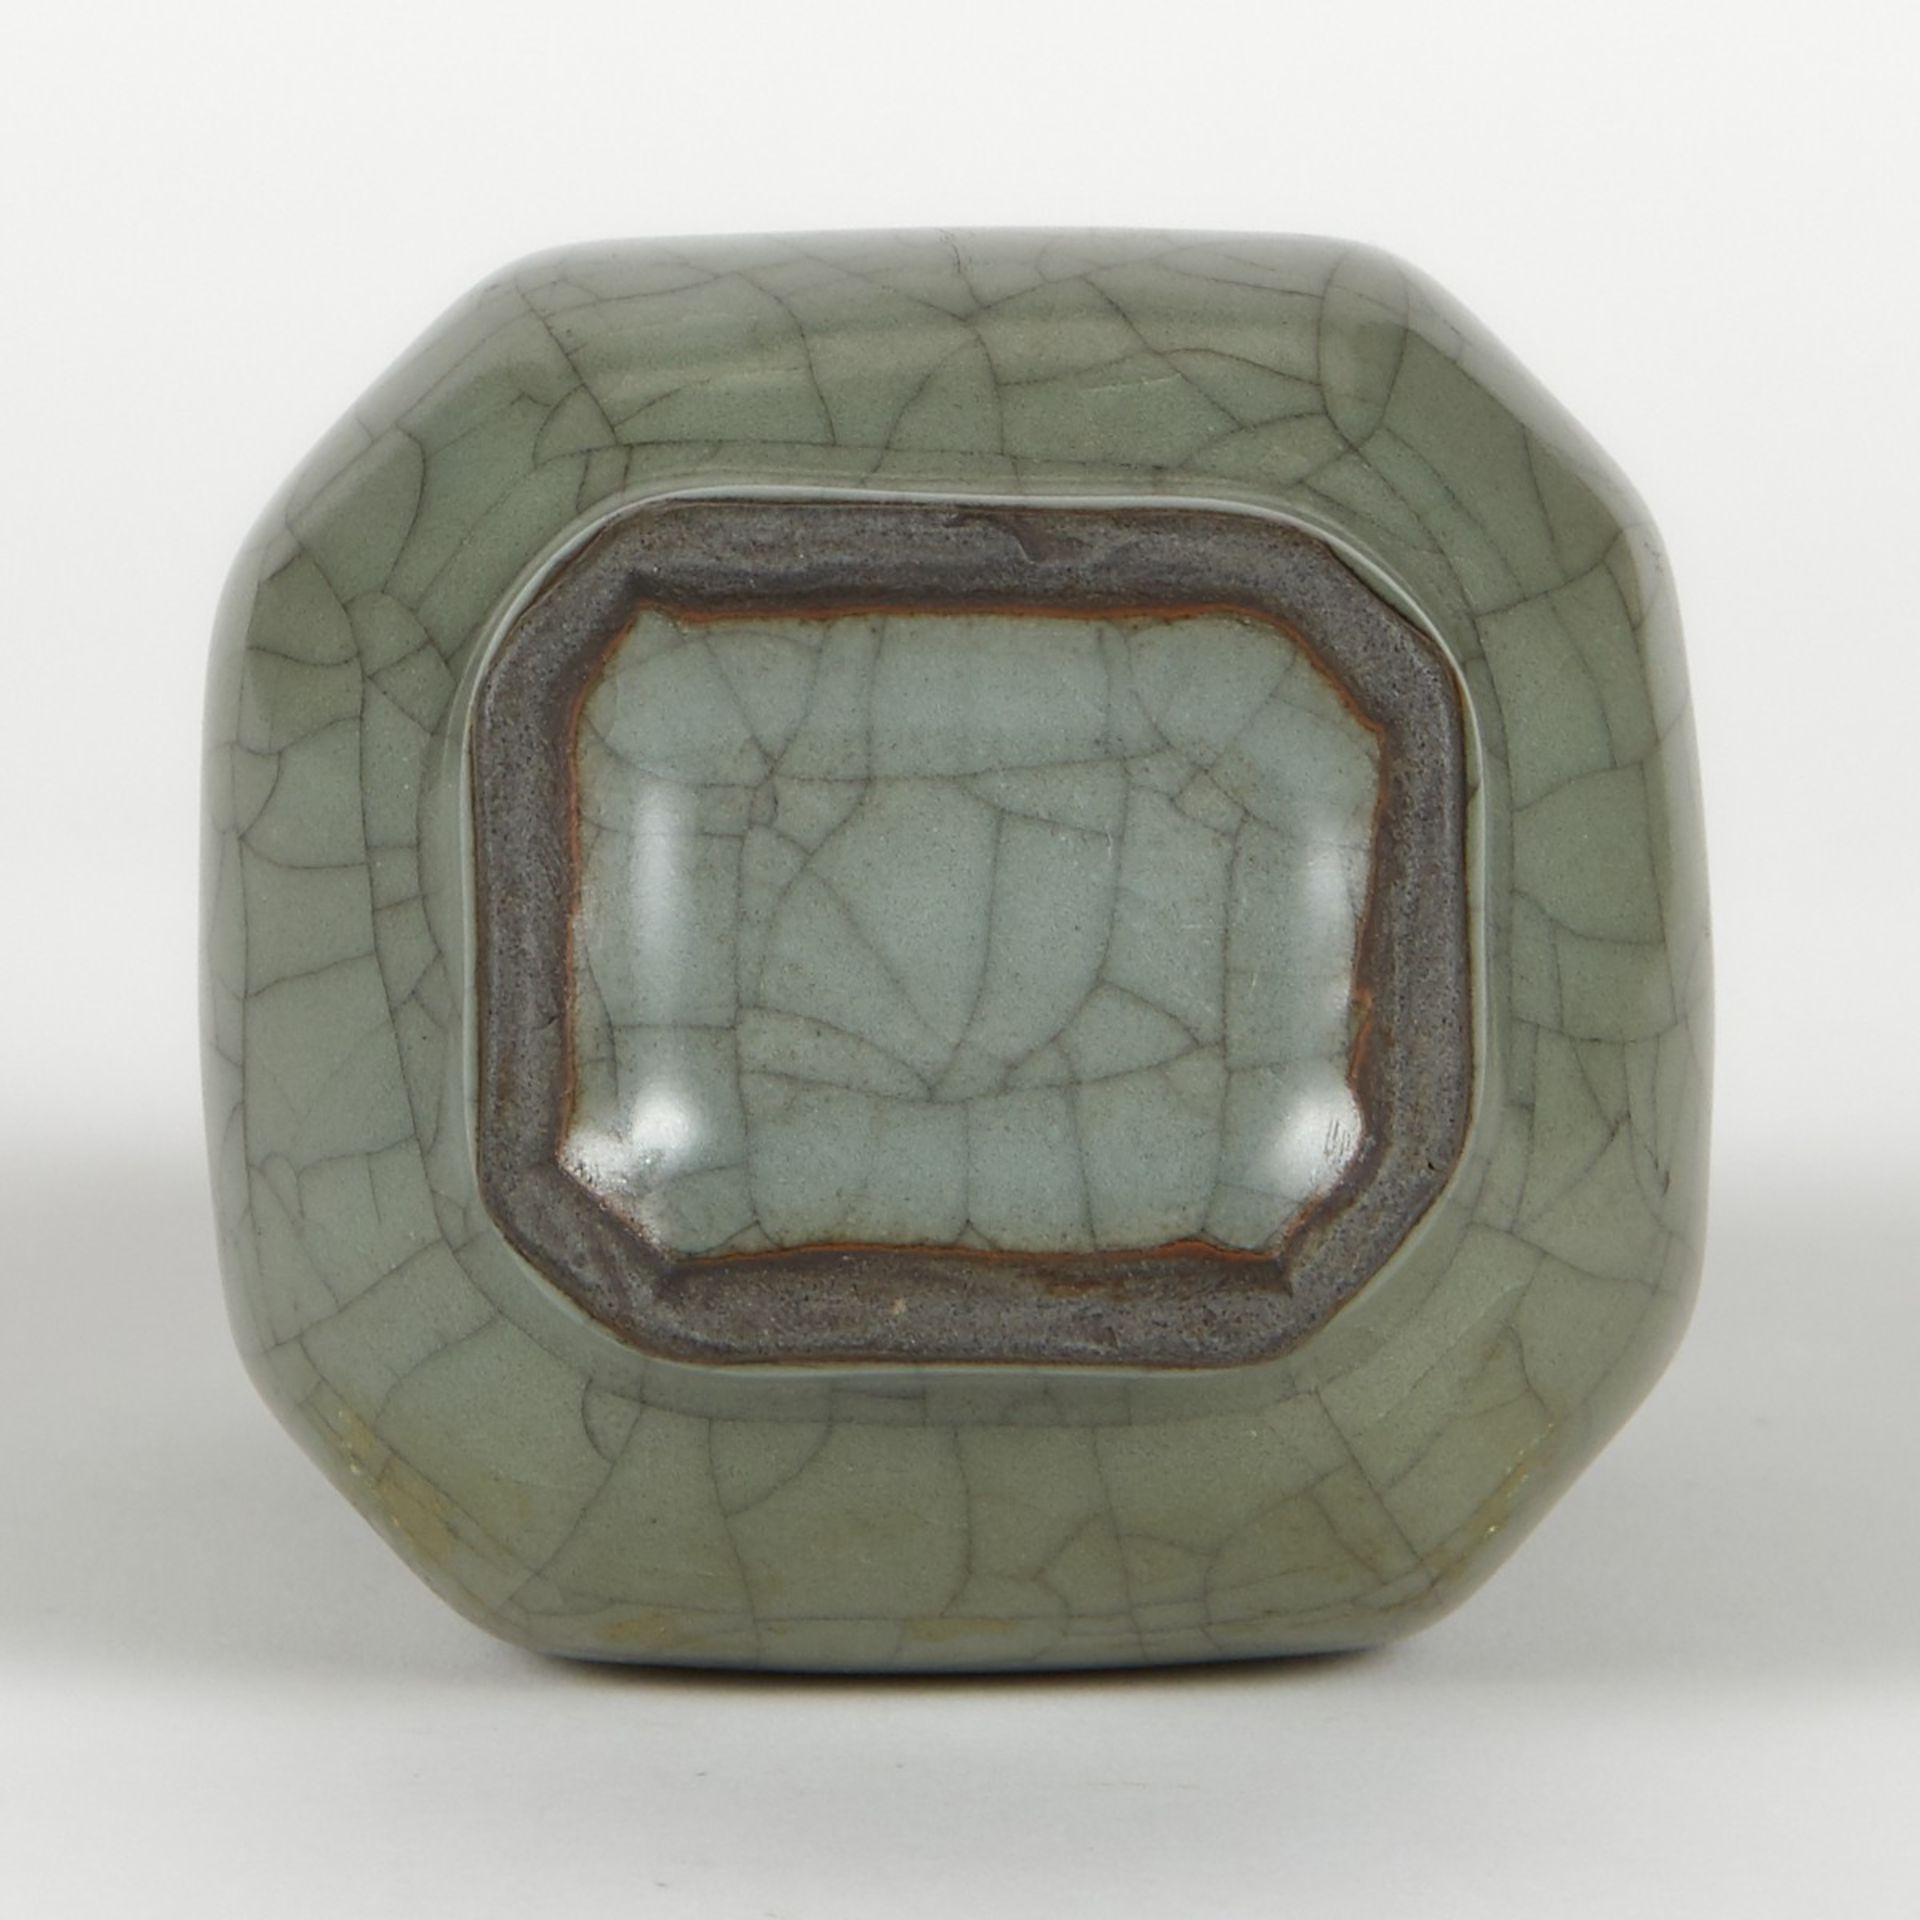 Chinese High Fired Ceramic Crackle Hu Vase - Image 6 of 7